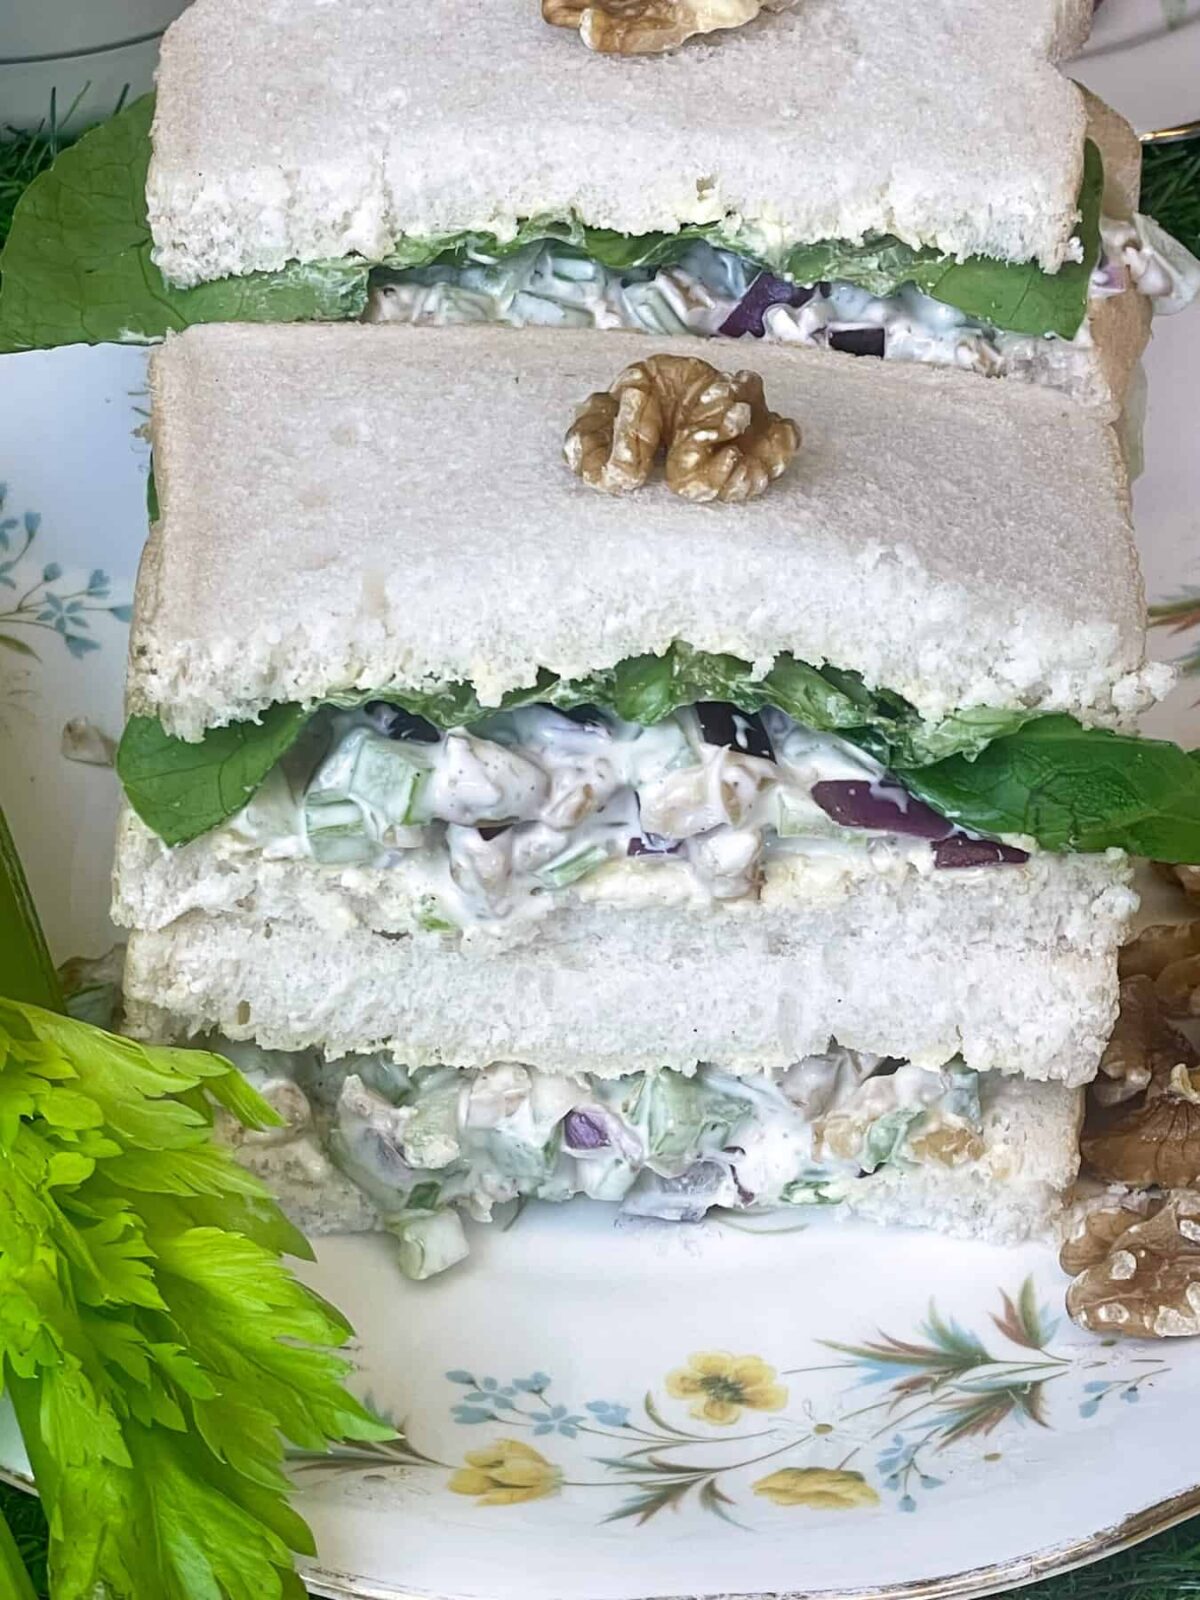 A stack of walnut celery sandwiches on yellow flower patterned plate with celery leaves to side.